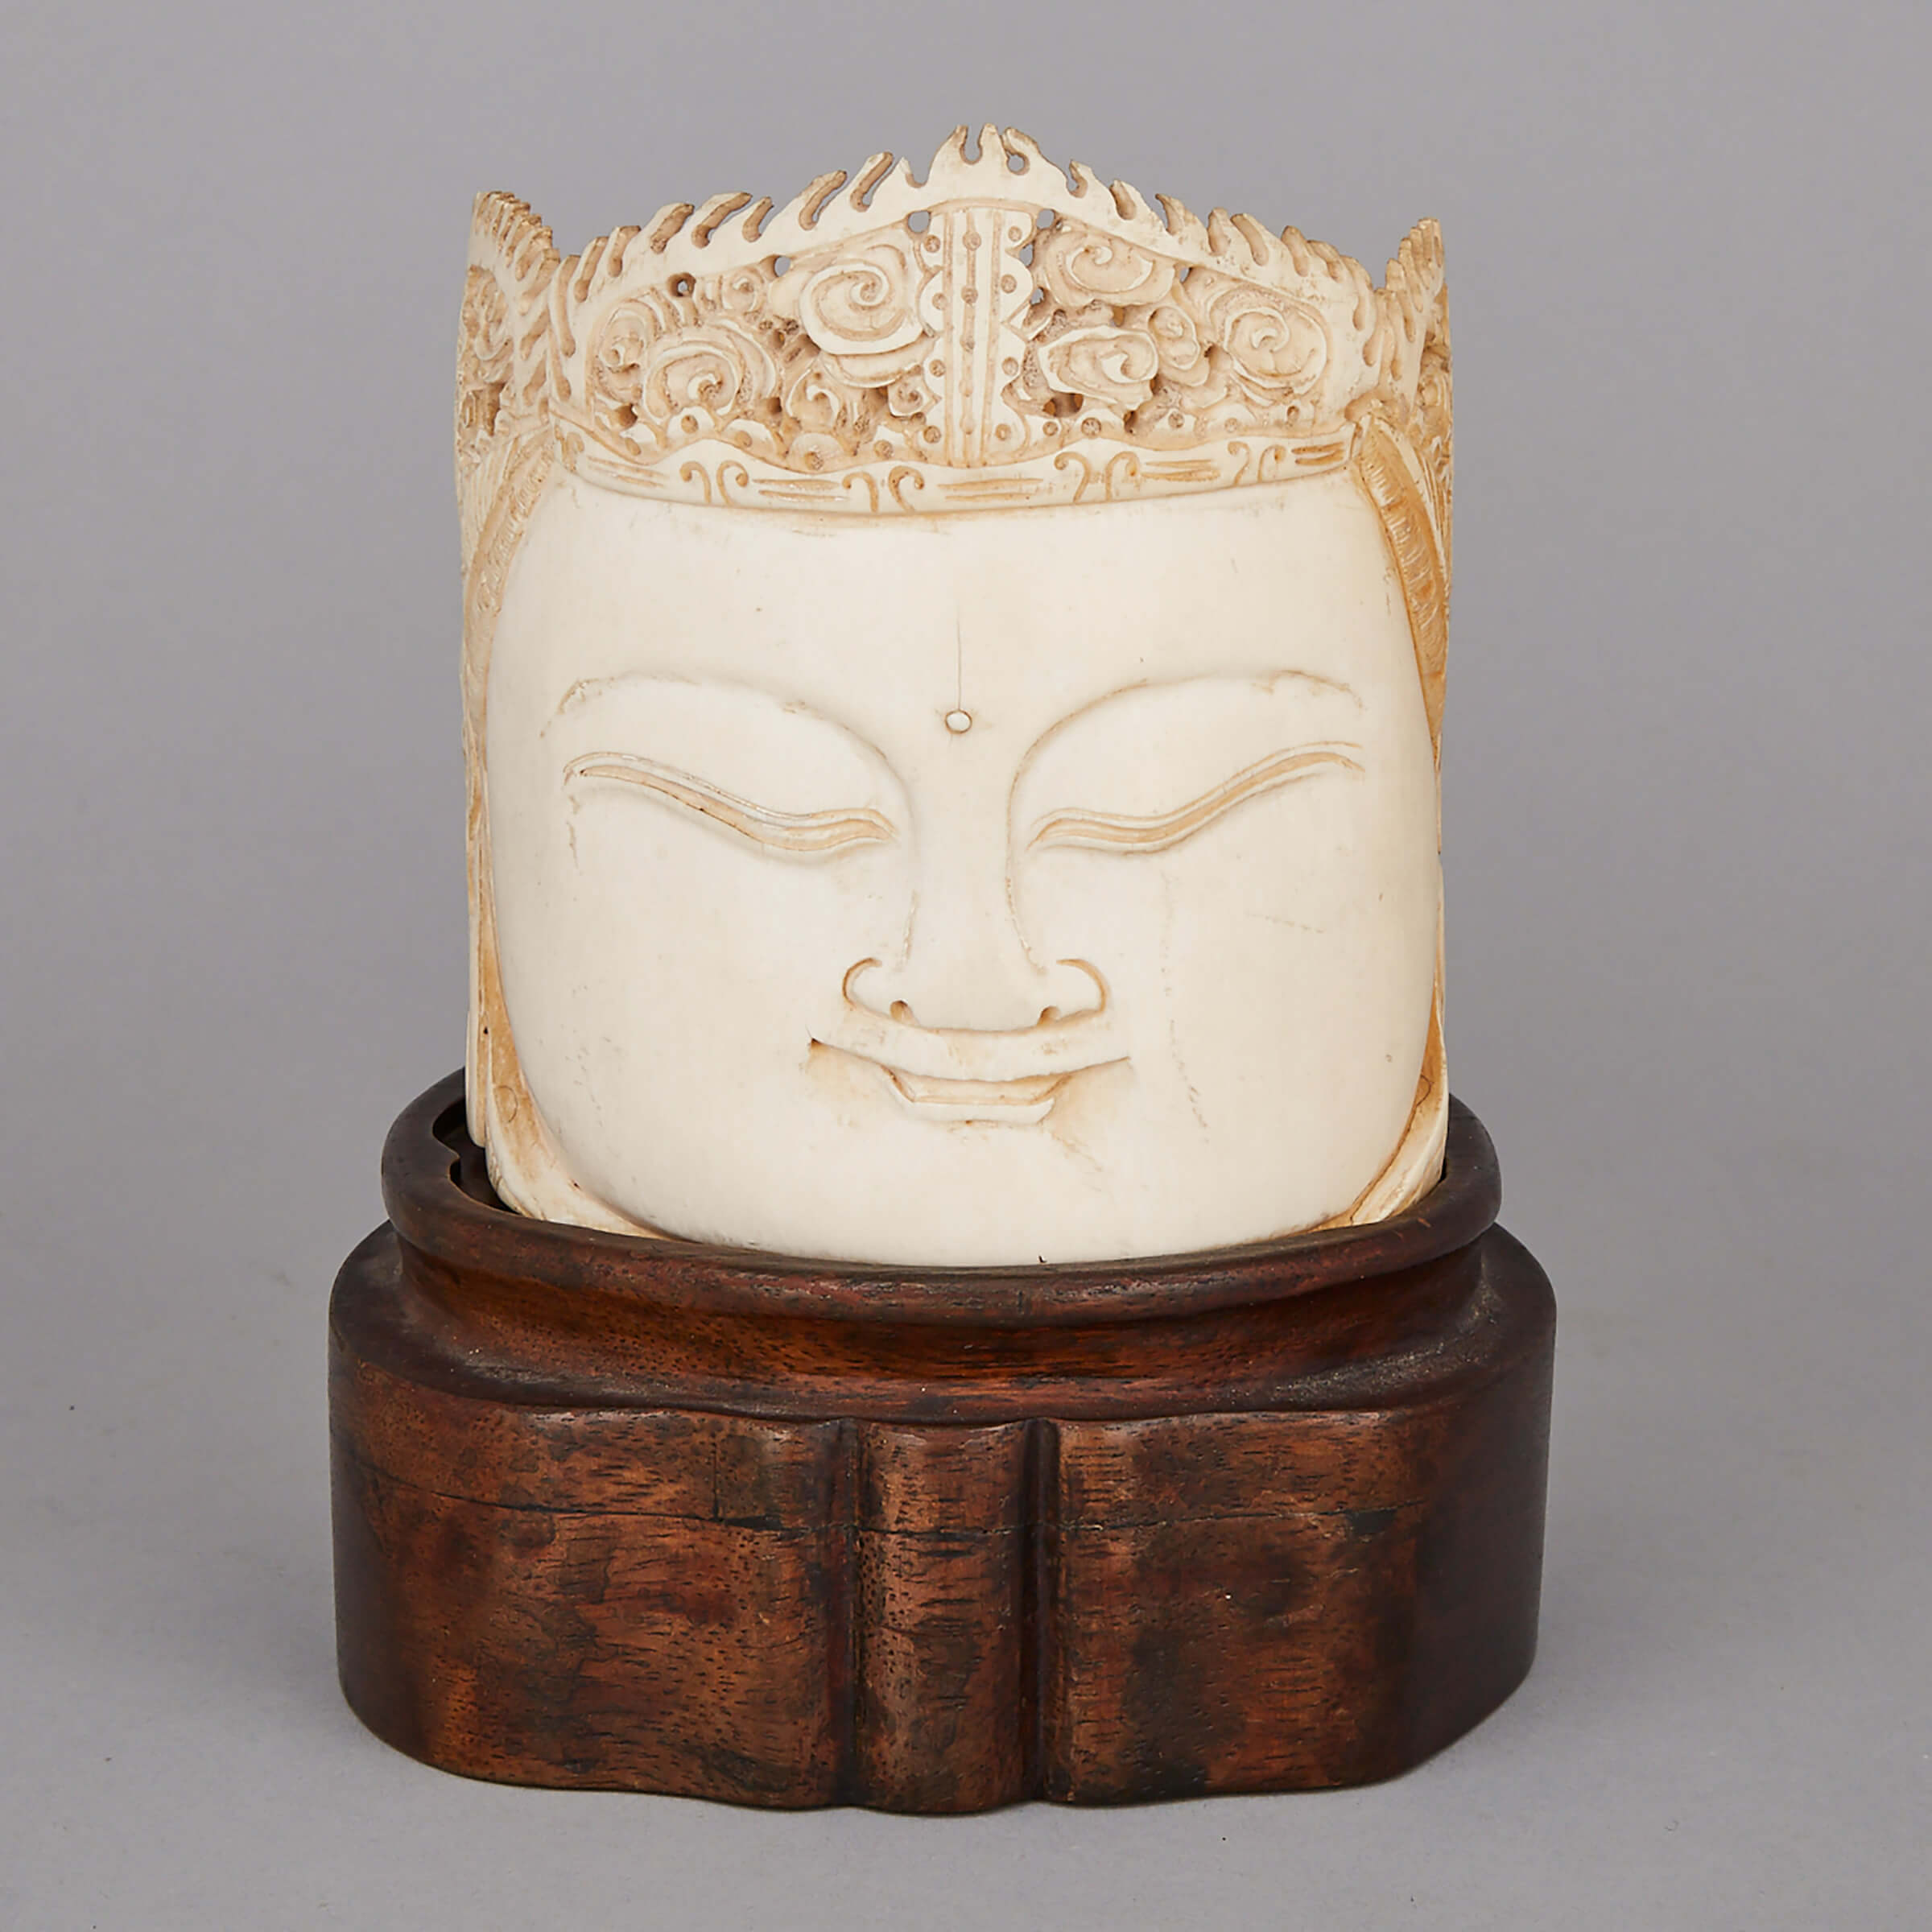 An Ivory Carved Head of Guanyin